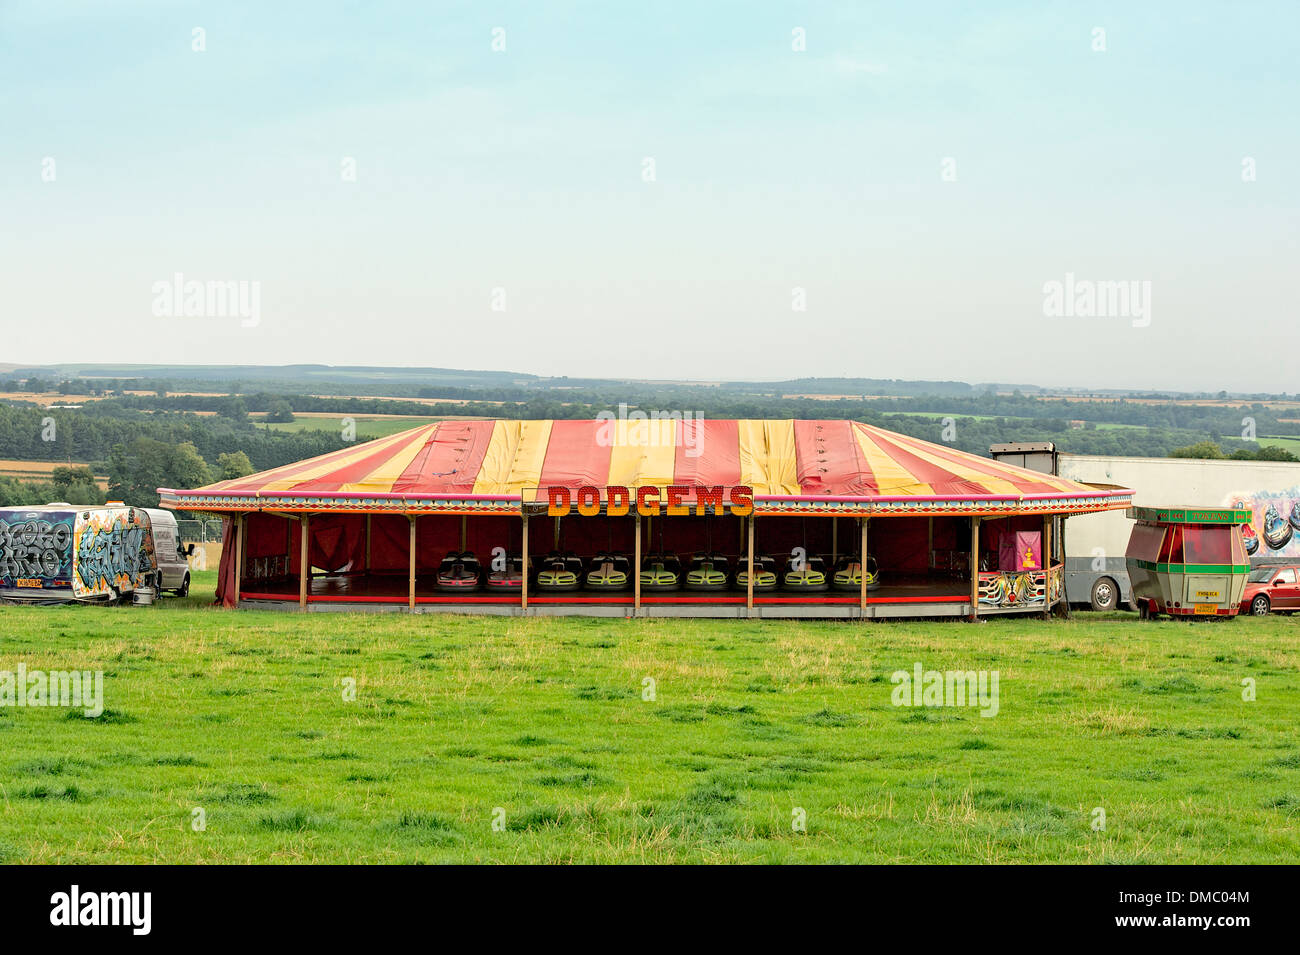 Parked dodgems in a red and yellow colorful colourful tent in a field at a British music festival. Stock Photo